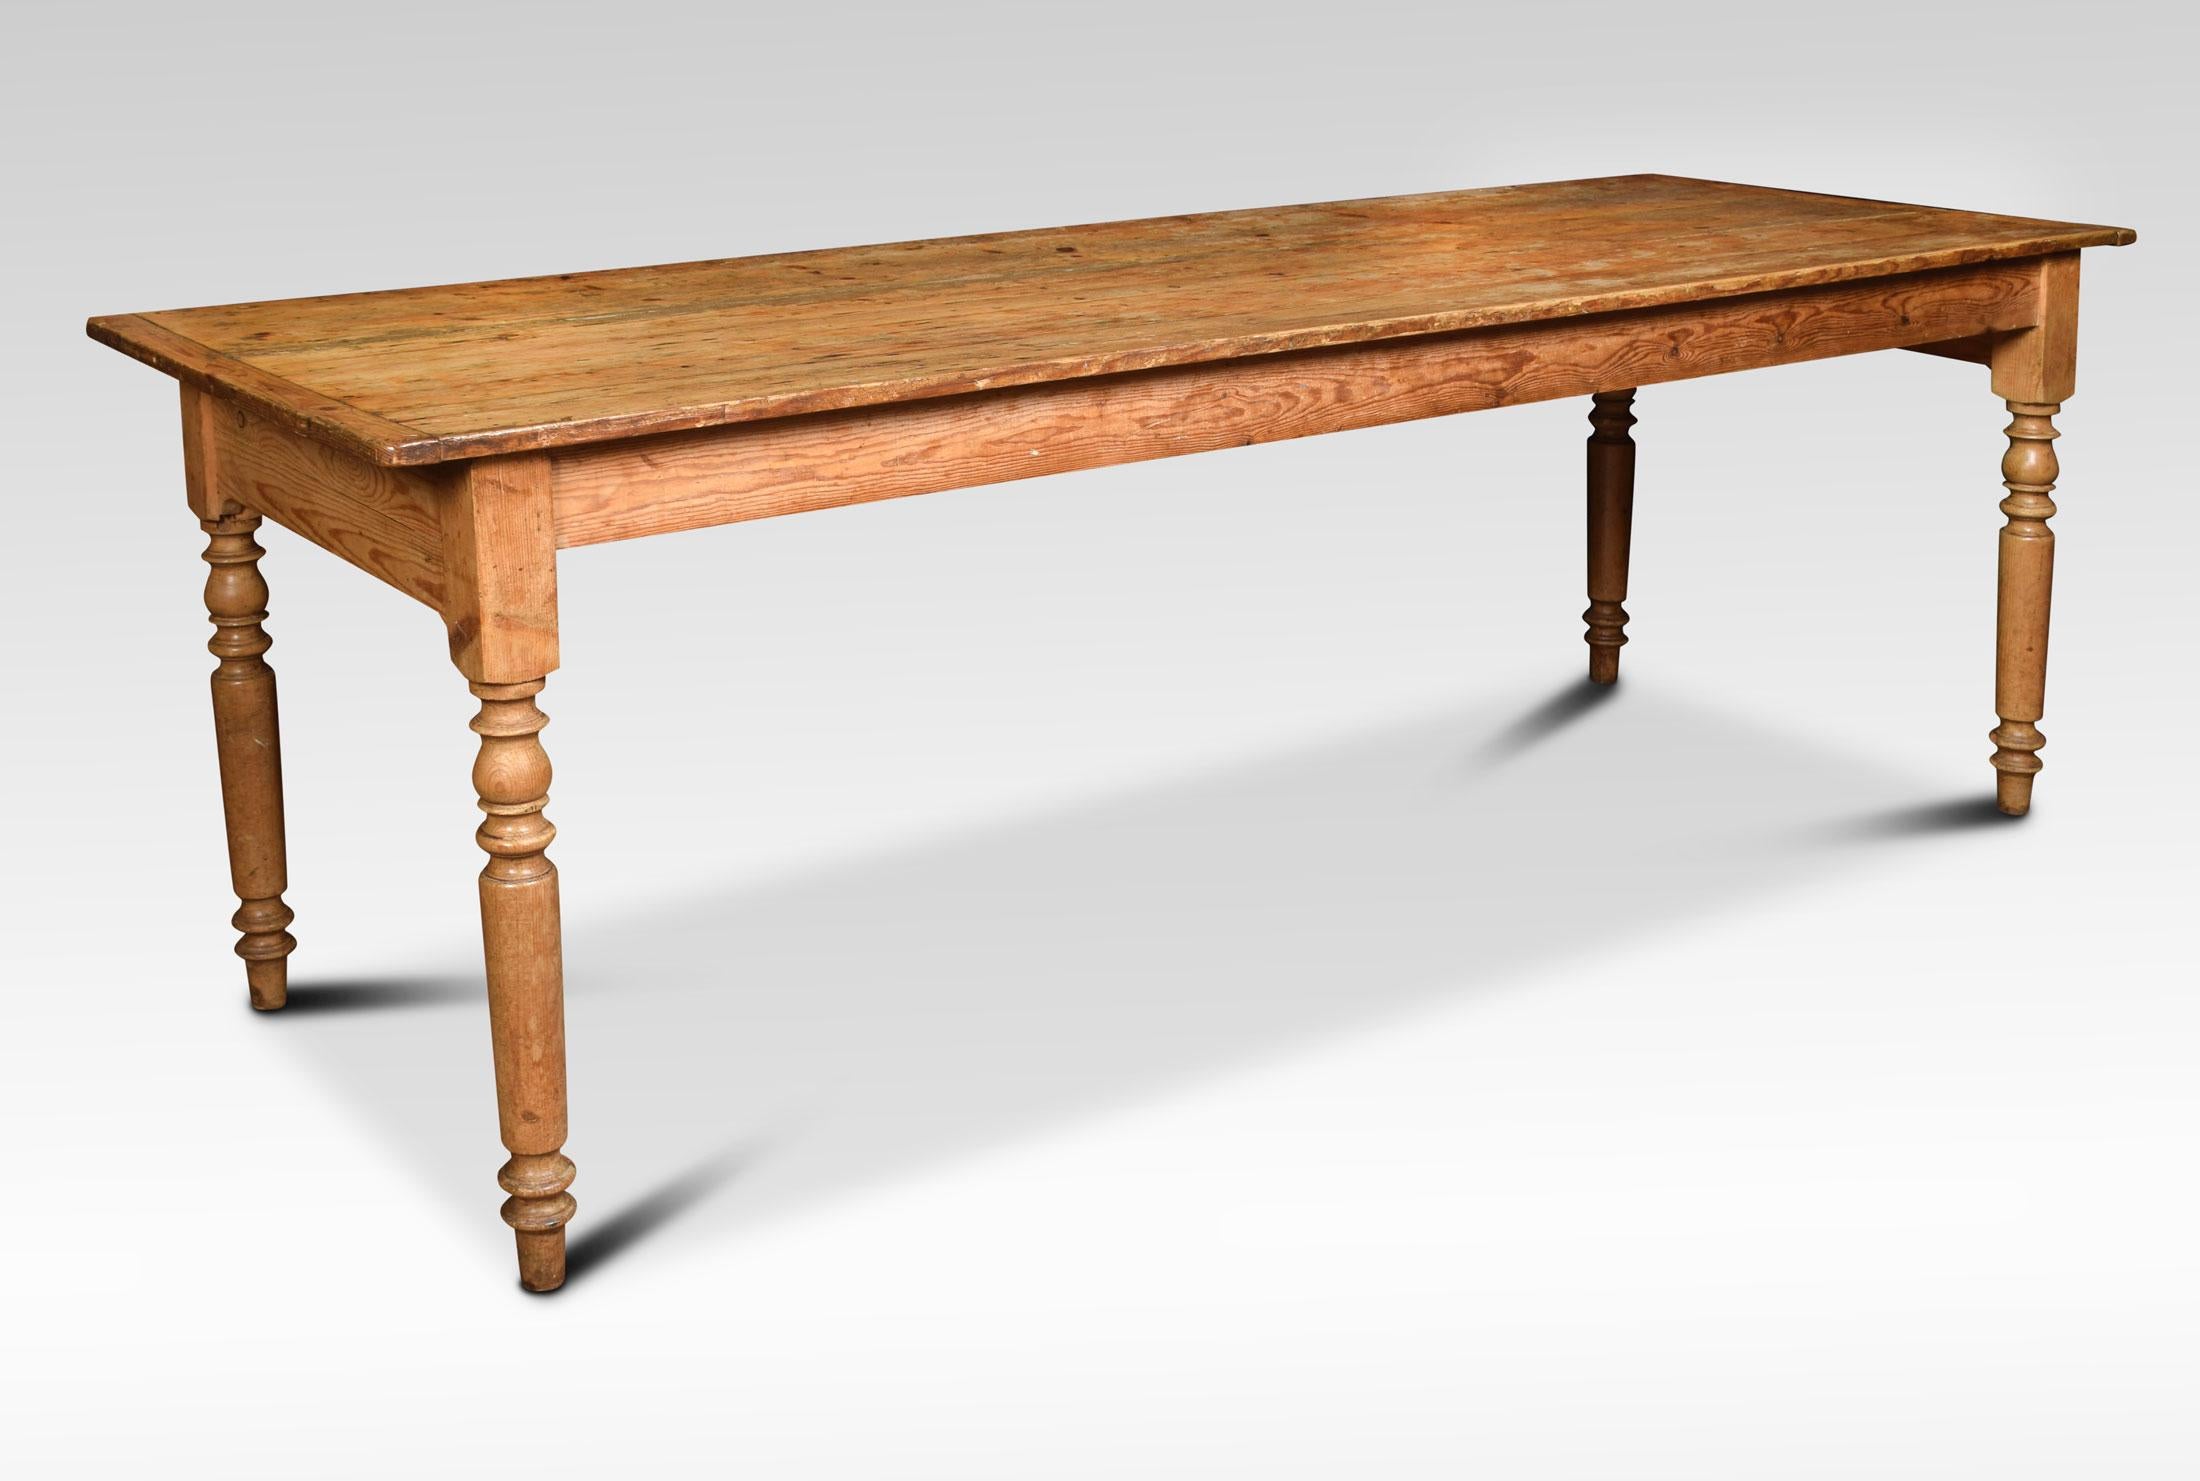 Pine dining table, the large rectangular top above a shallow frieze fitted with an end drawer. All raised up on four turned tapered legs (will seat 10 people)
Dimensions
Height 31 Inches
Width 90 Inches
Depth 30.5 Inches